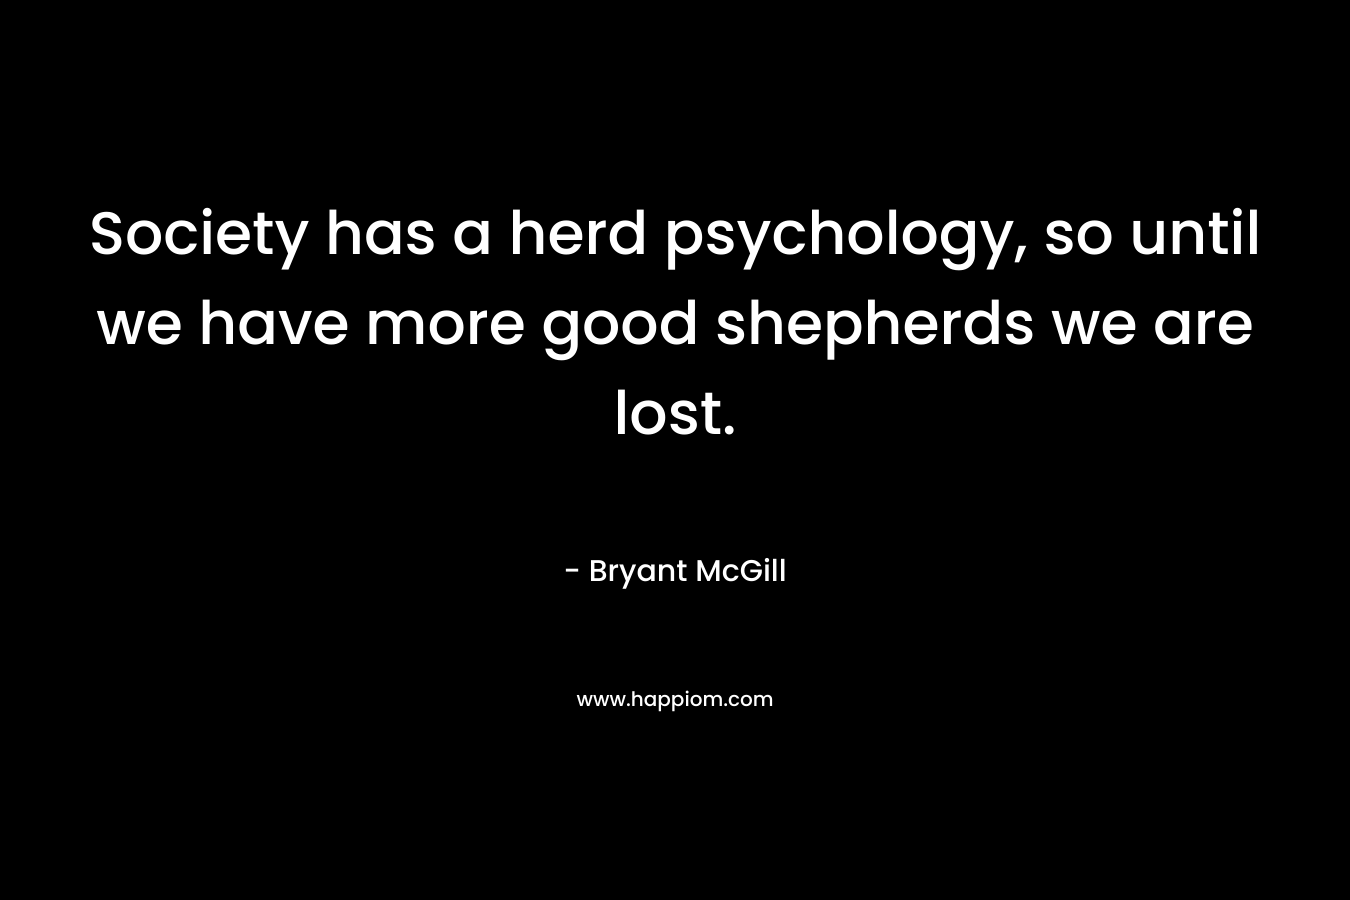 Society has a herd psychology, so until we have more good shepherds we are lost. – Bryant McGill